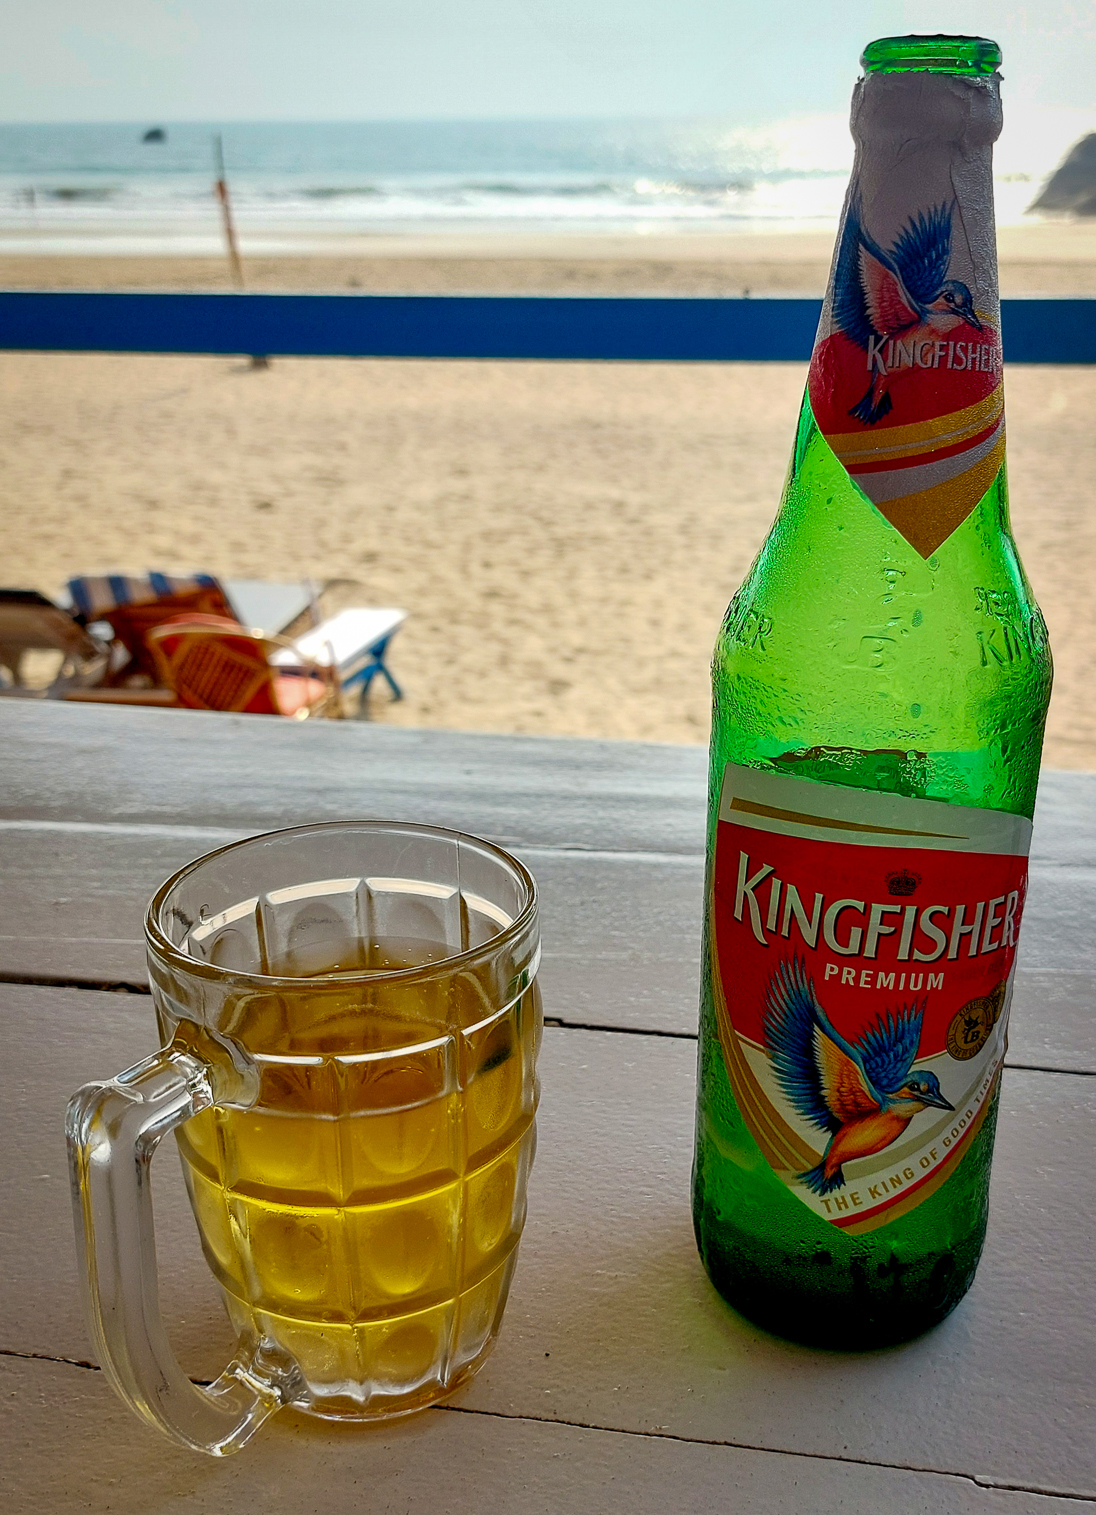 <span  class="uc_style_uc_tiles_grid_image_elementor_uc_items_attribute_title" style="color:#ffffff;">That's the local beer: Kingfisher</span>